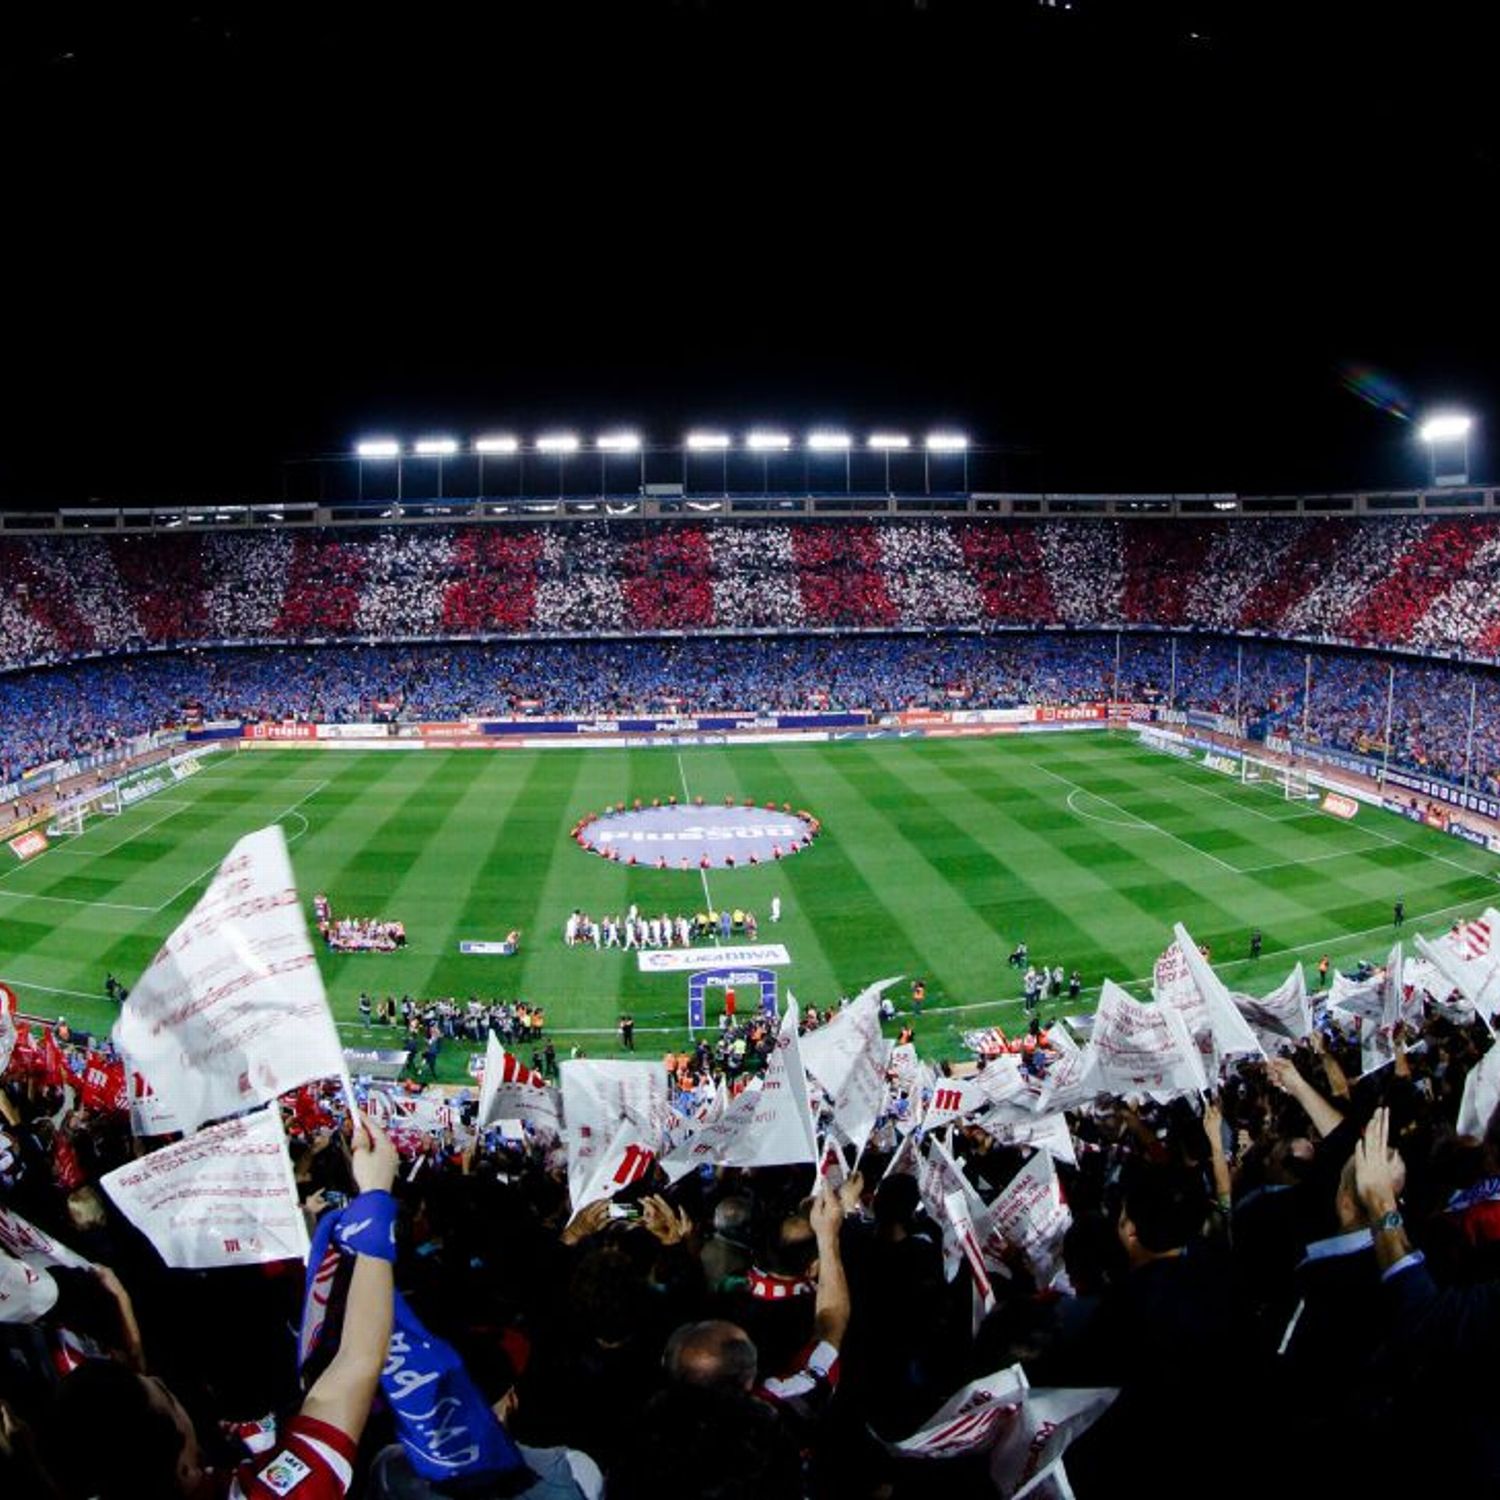 Atletico Madrid vs Real Madrid atmosphere will be limited by lack of away support ...